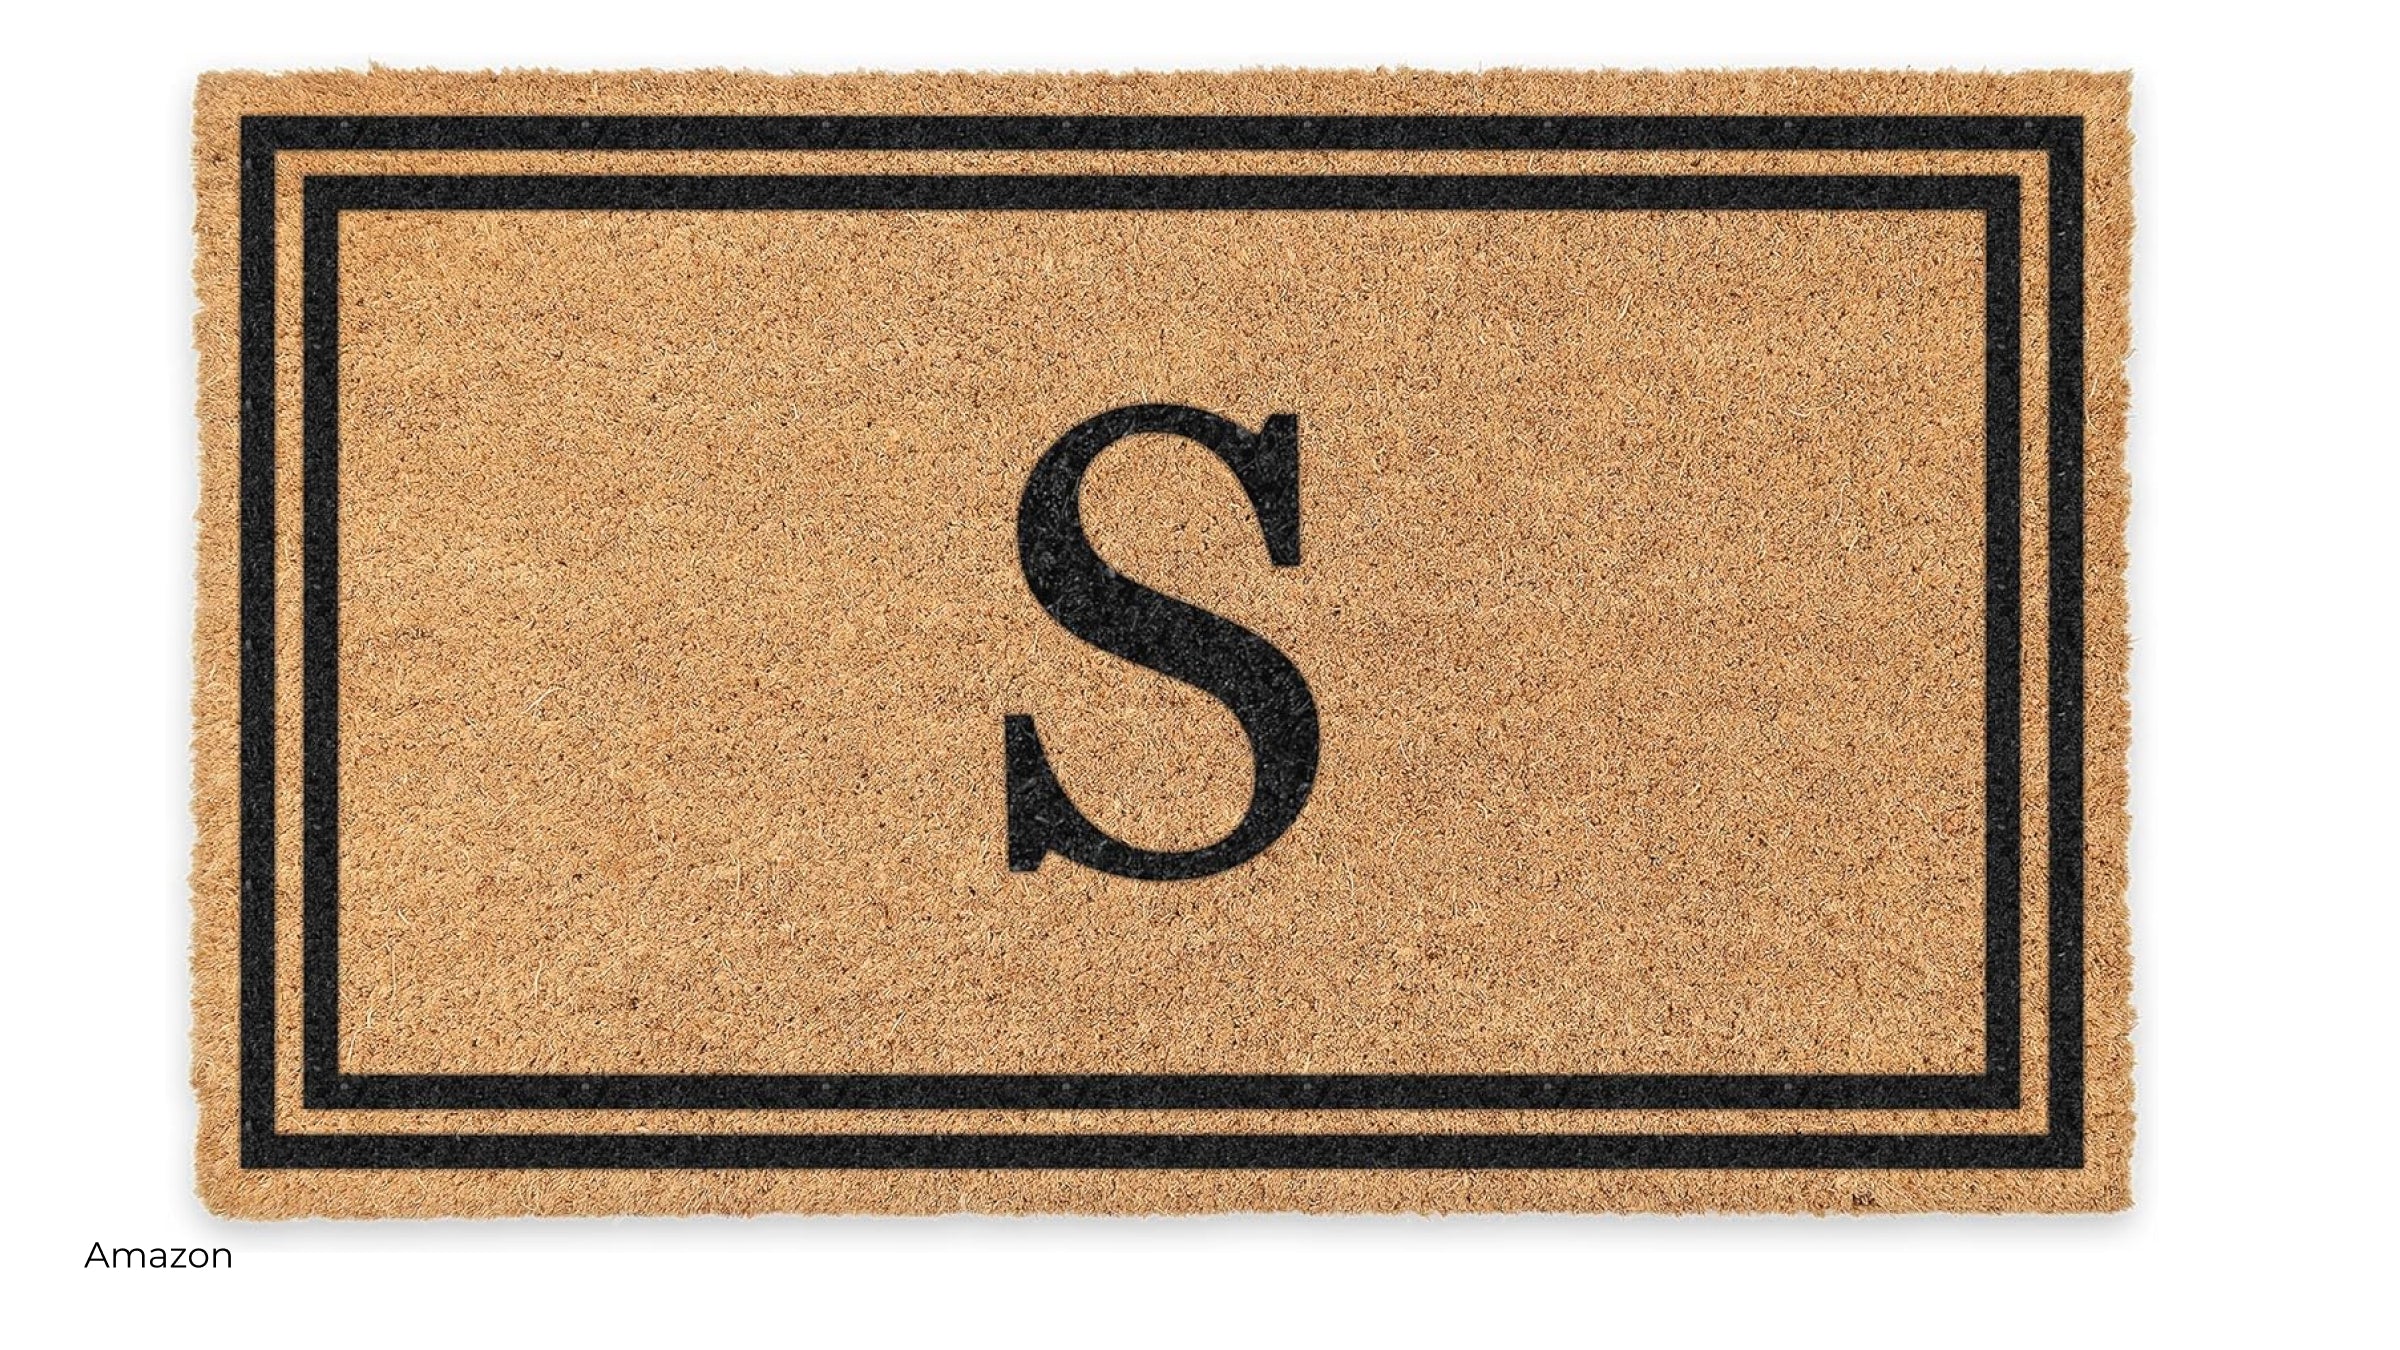 Personalized door mat from Amazon with the letter S centered